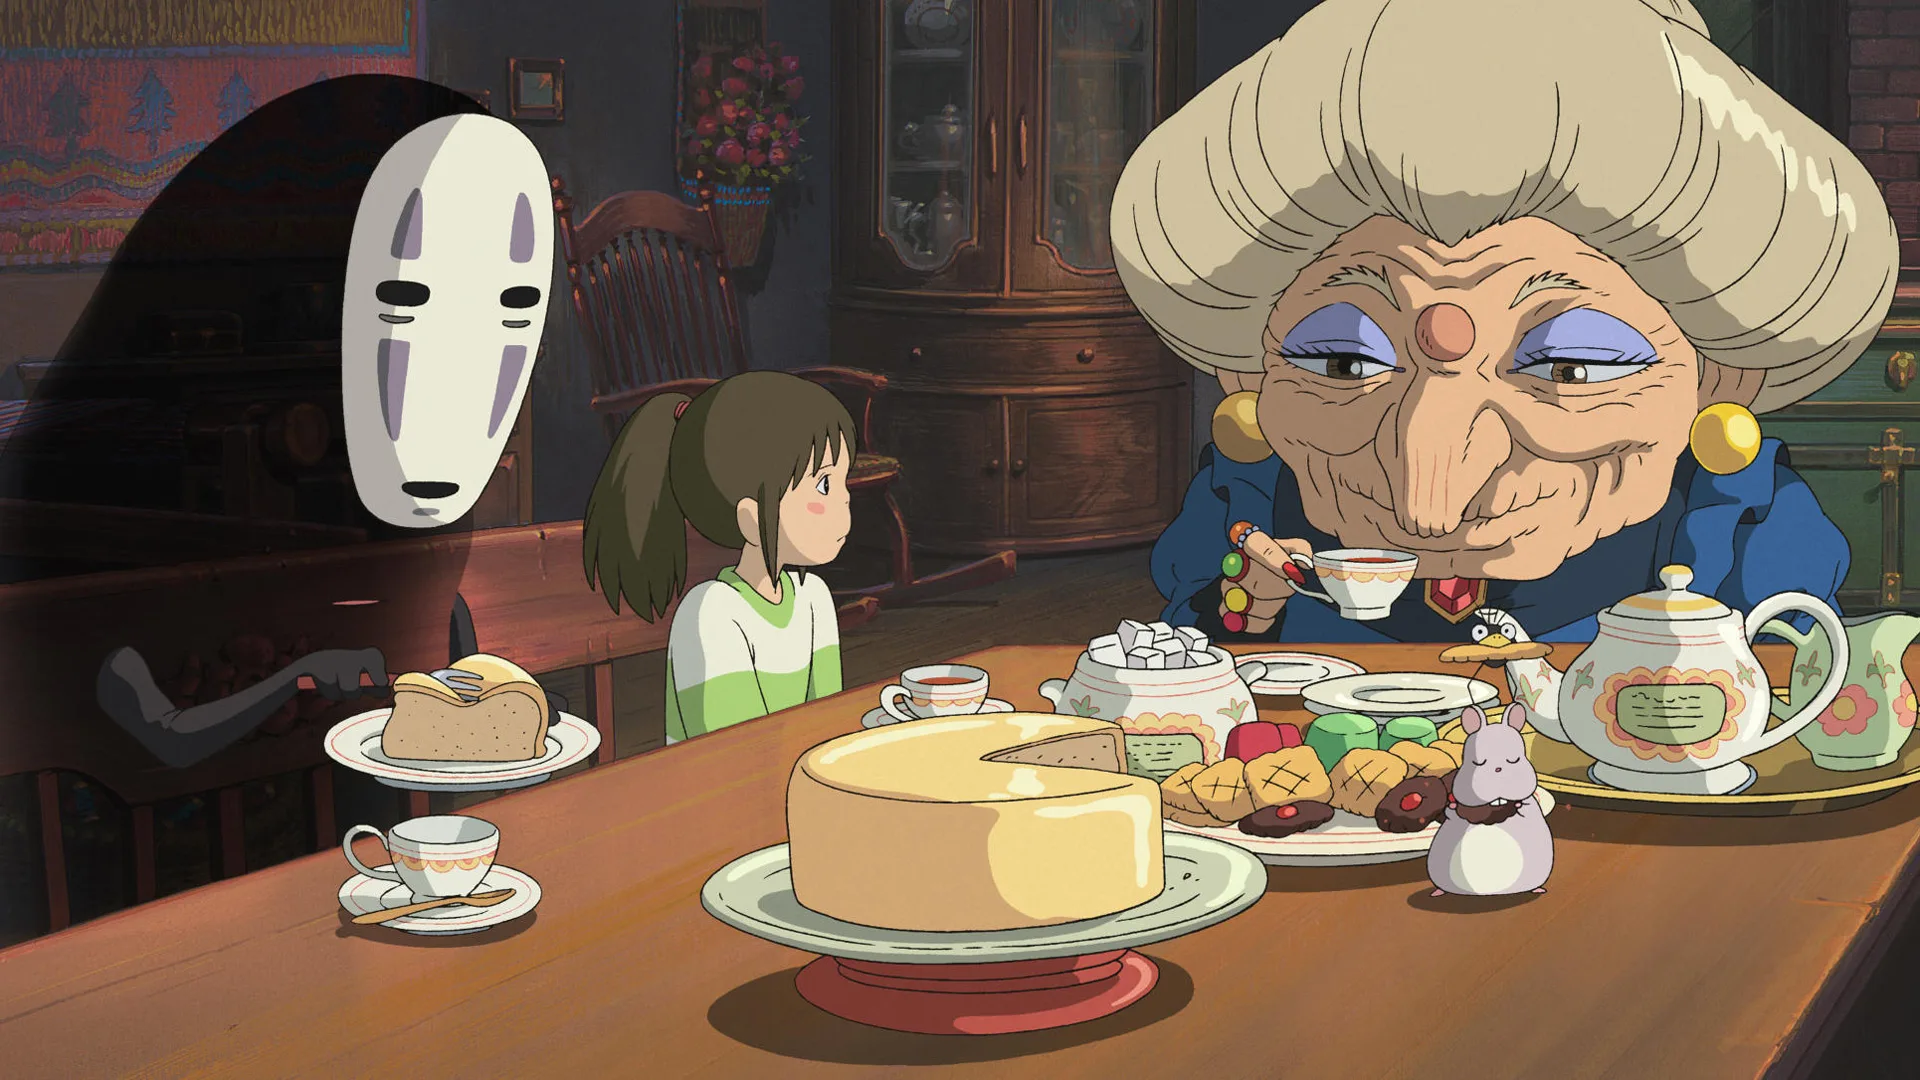 A still from the animated film Spirited Away showing the characters Zenith, No-Face and Chihiro at a table full of food